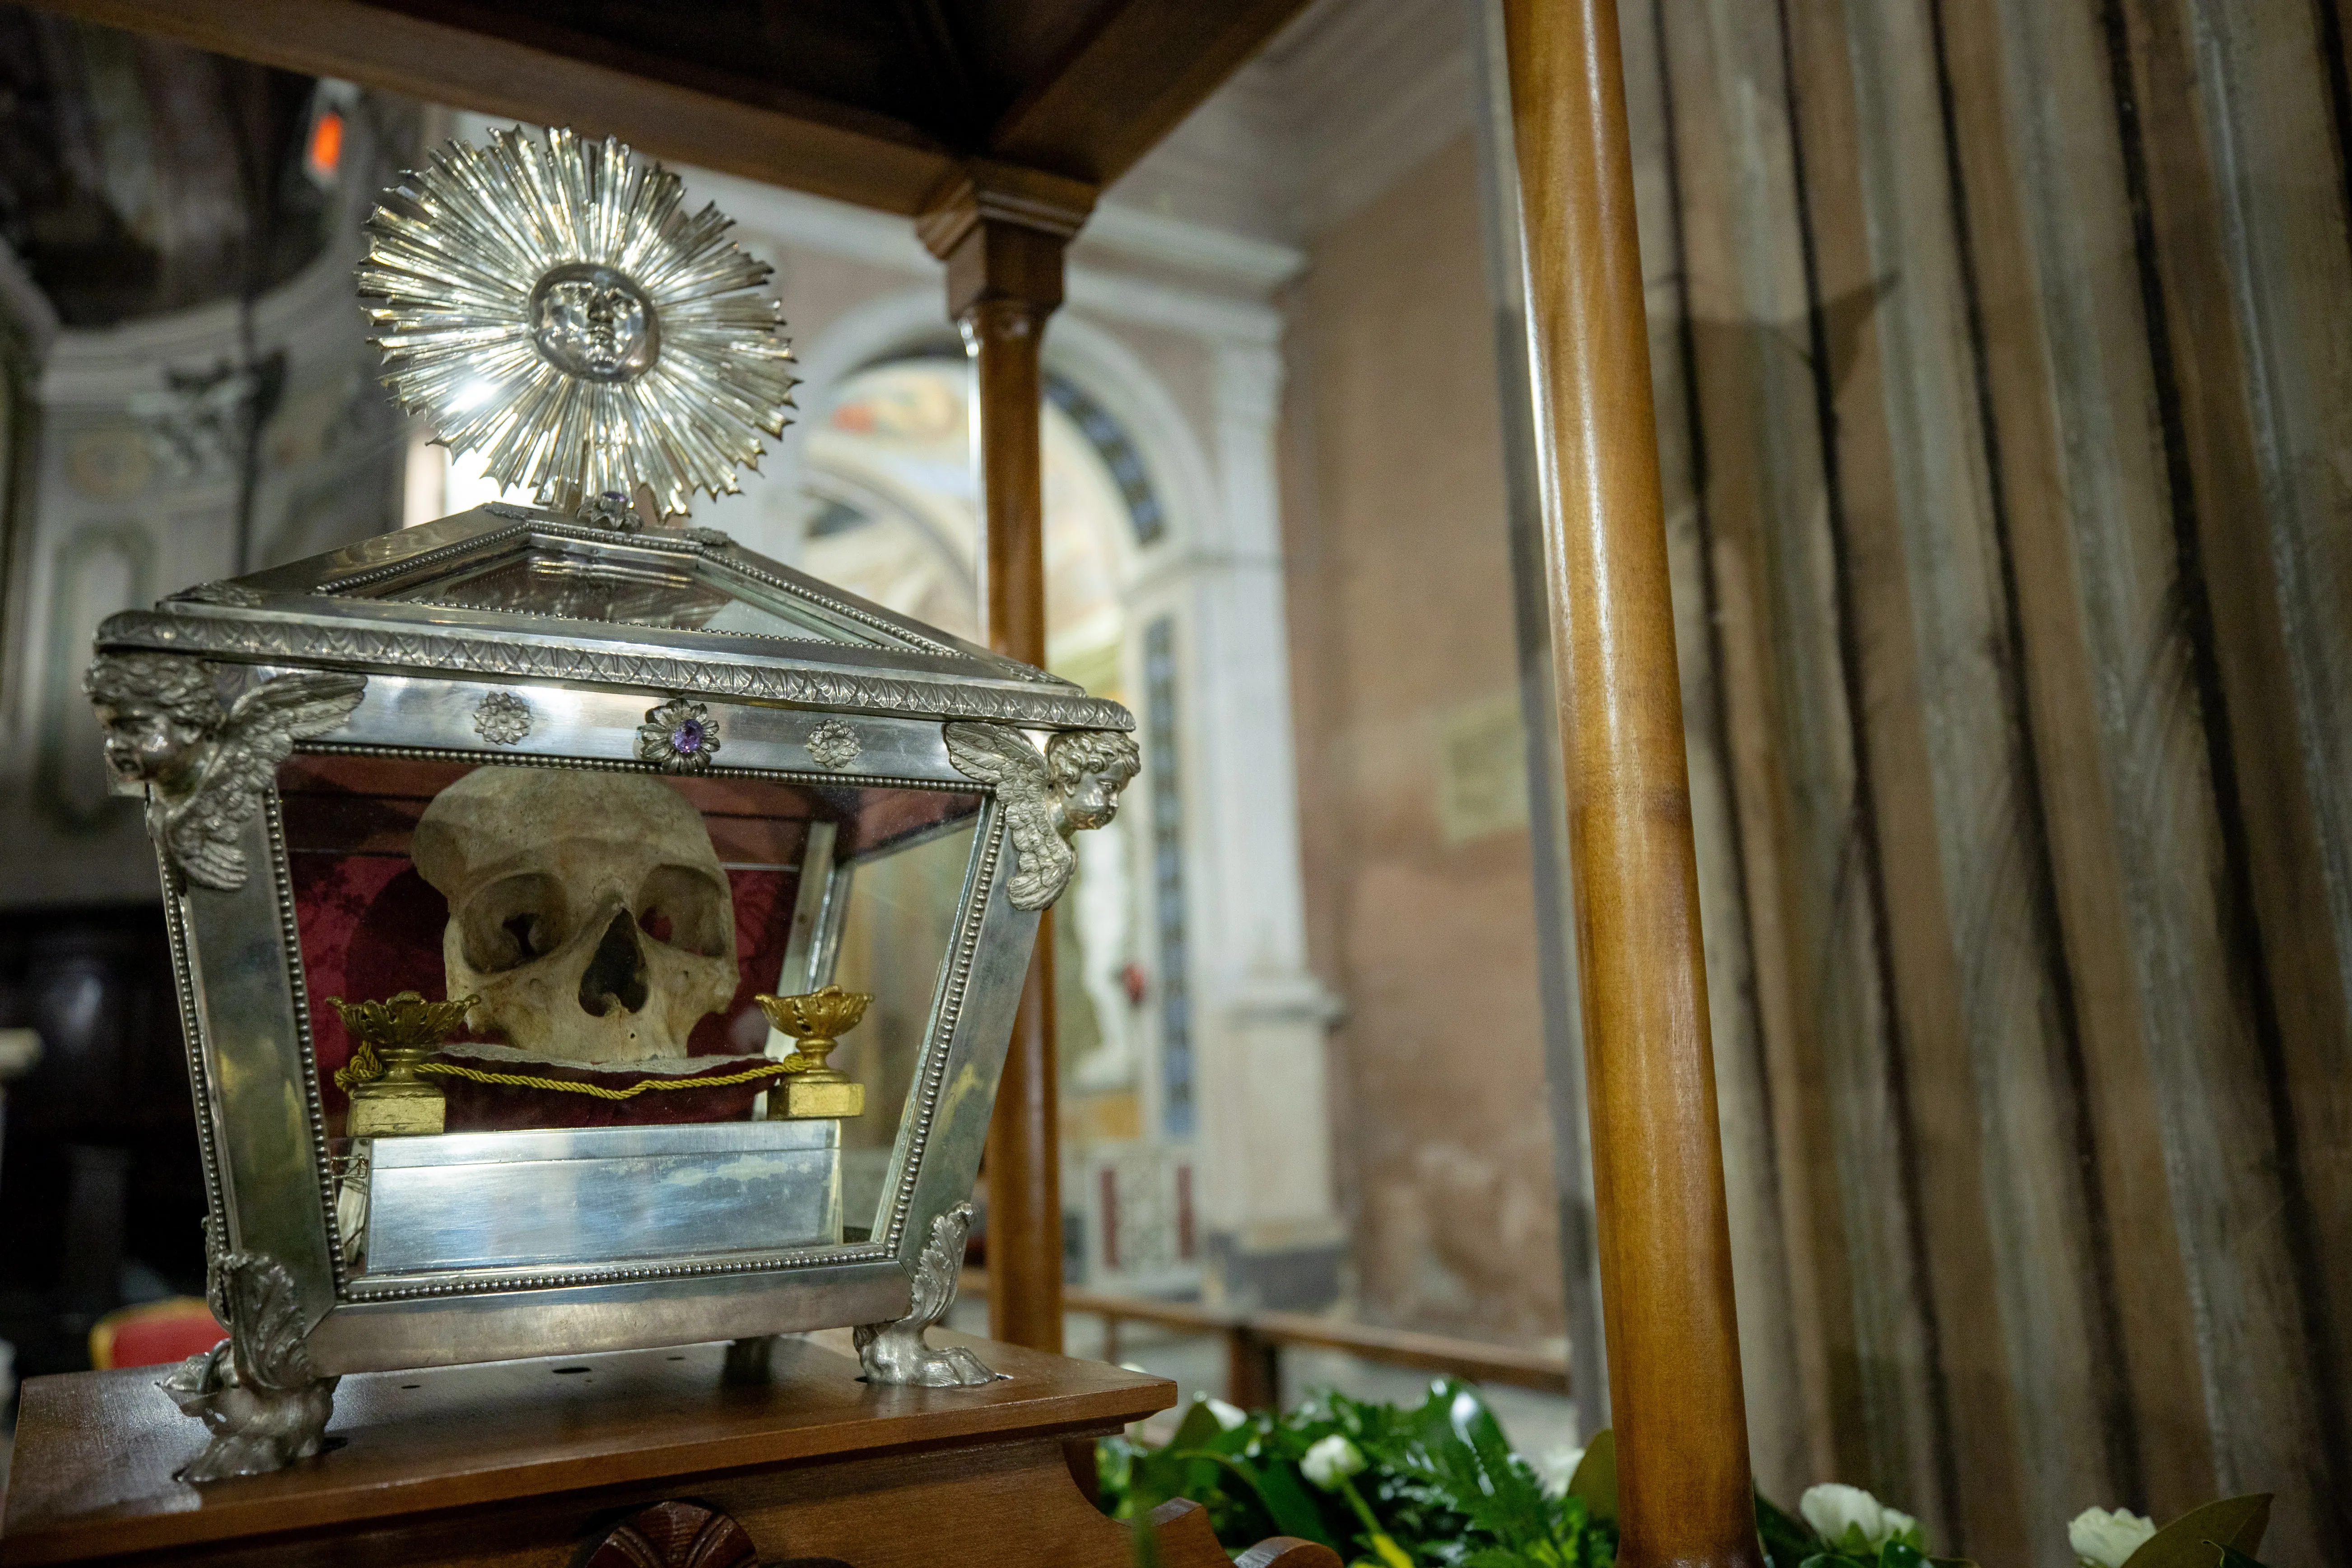 The purported skull of St. Thomas Aquinas in the Italian town of Priverno.?w=200&h=150